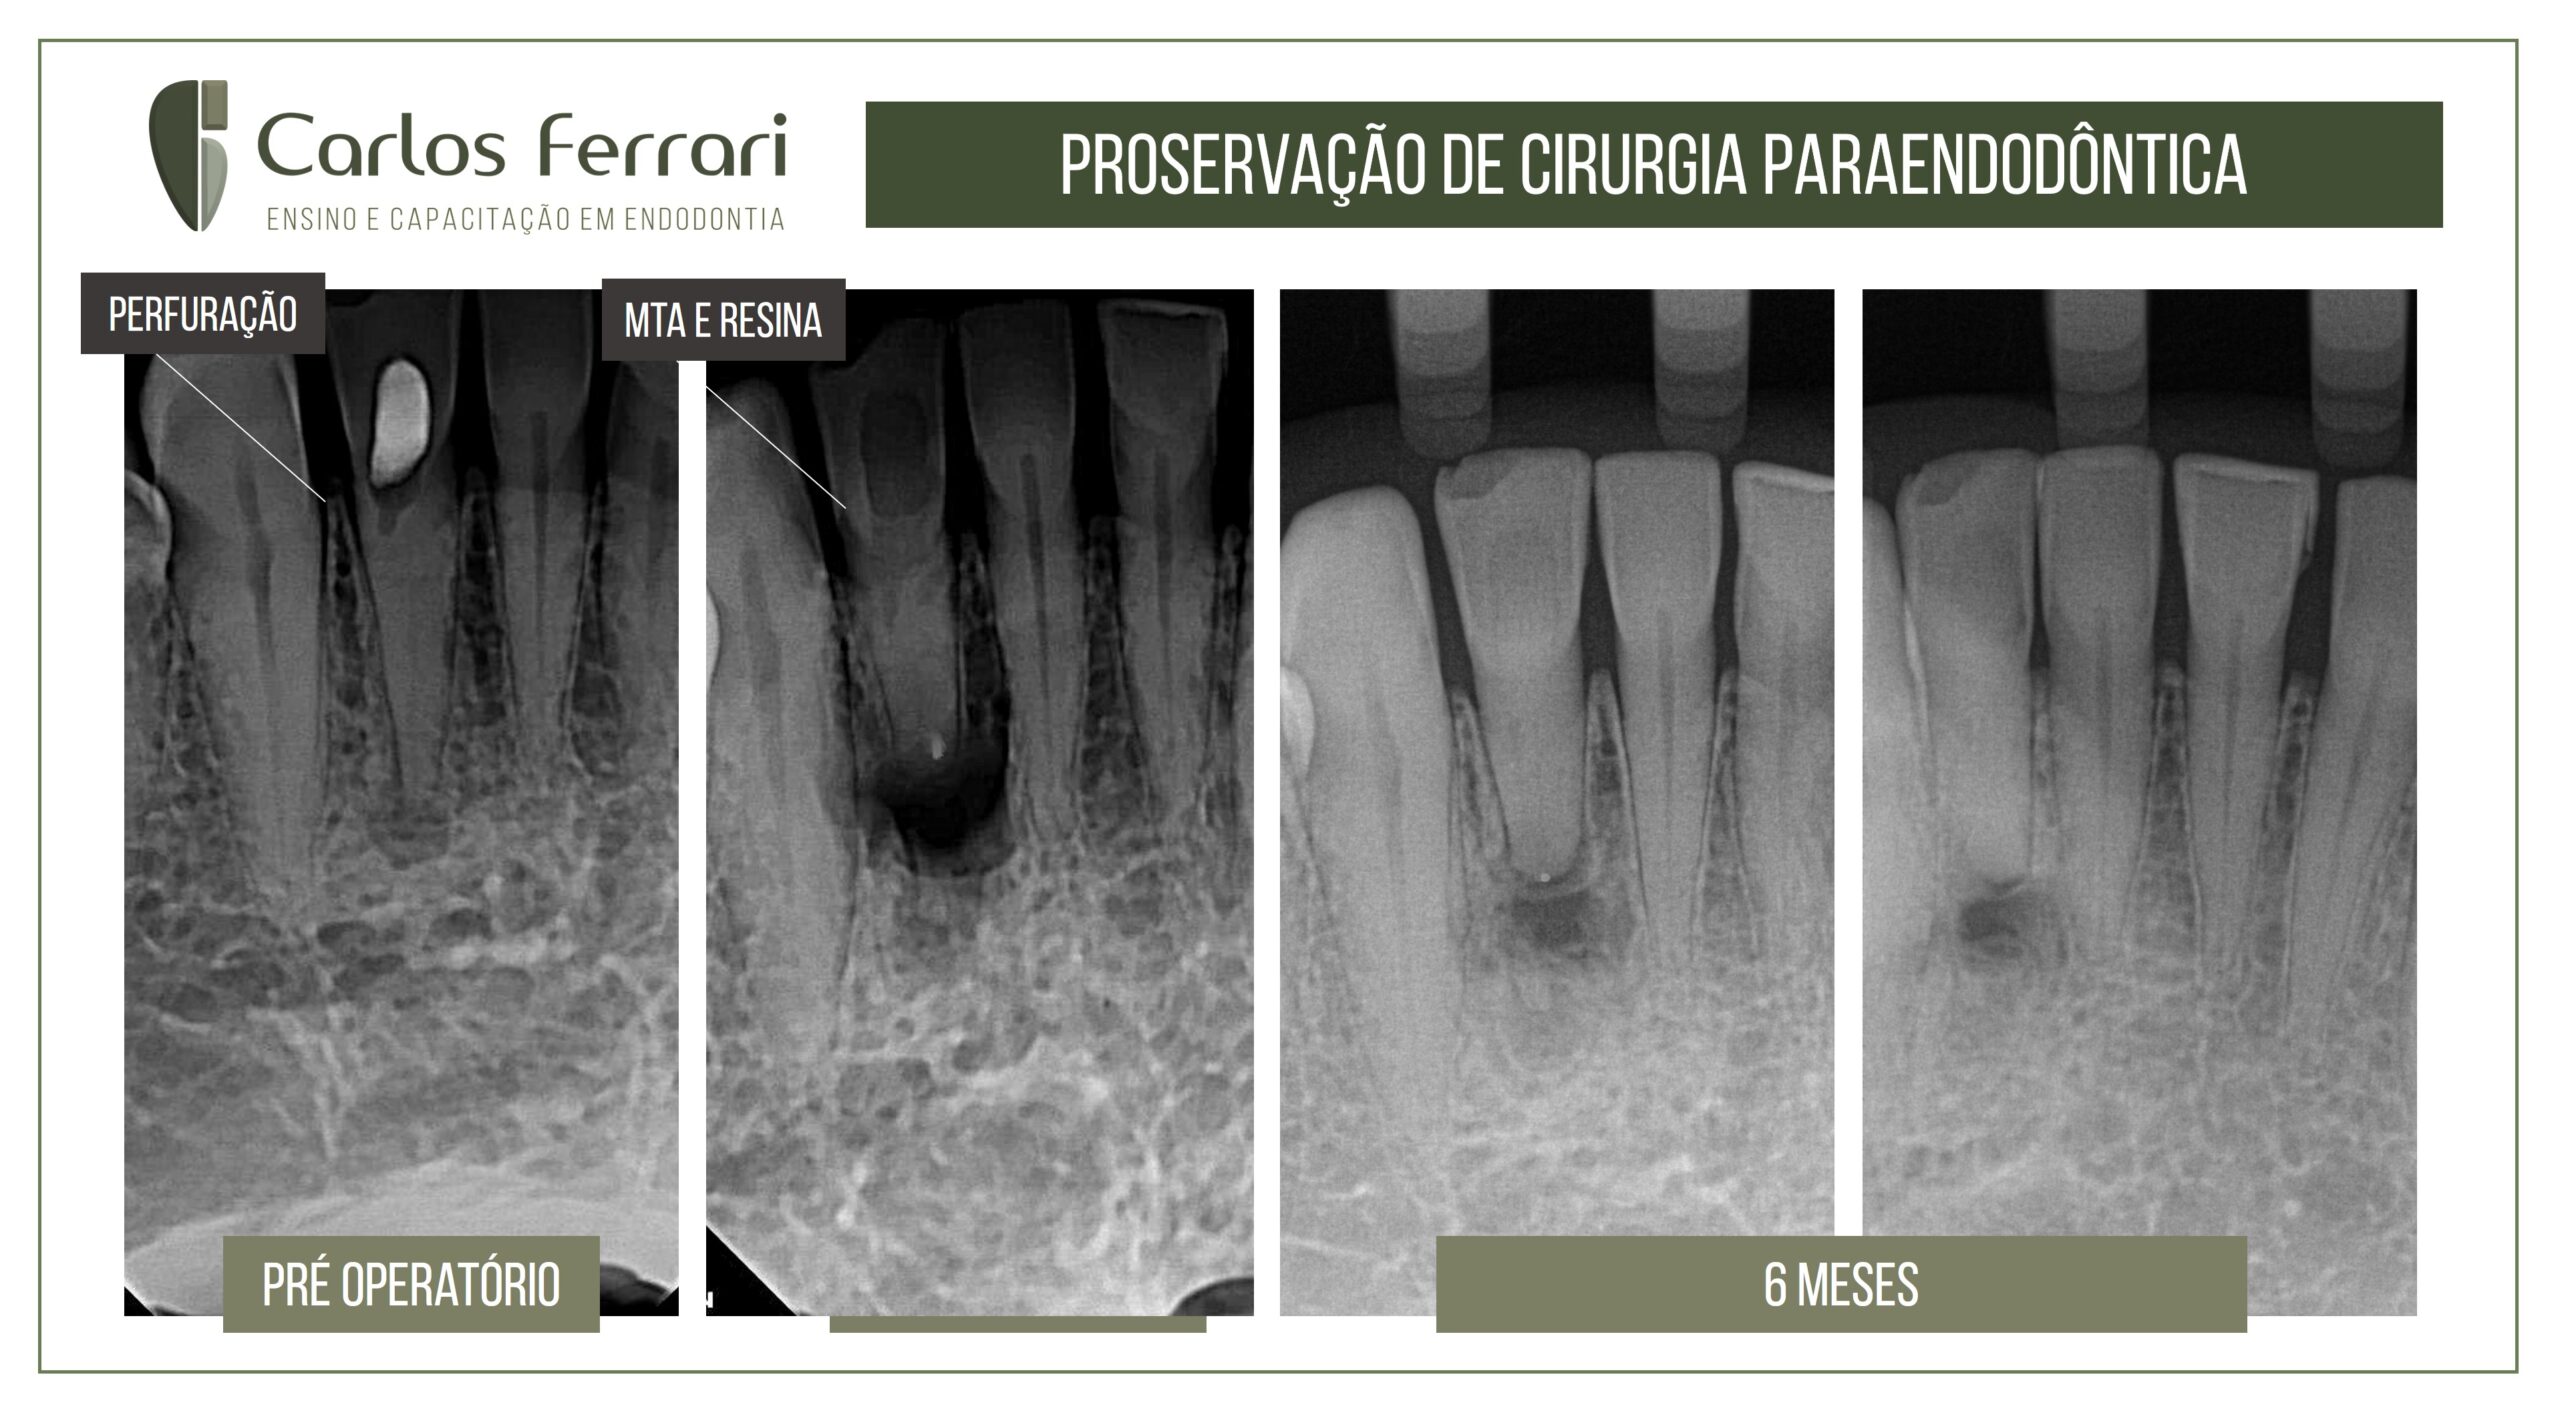 You are currently viewing Endodontic surgery. Proservation after 6 months.